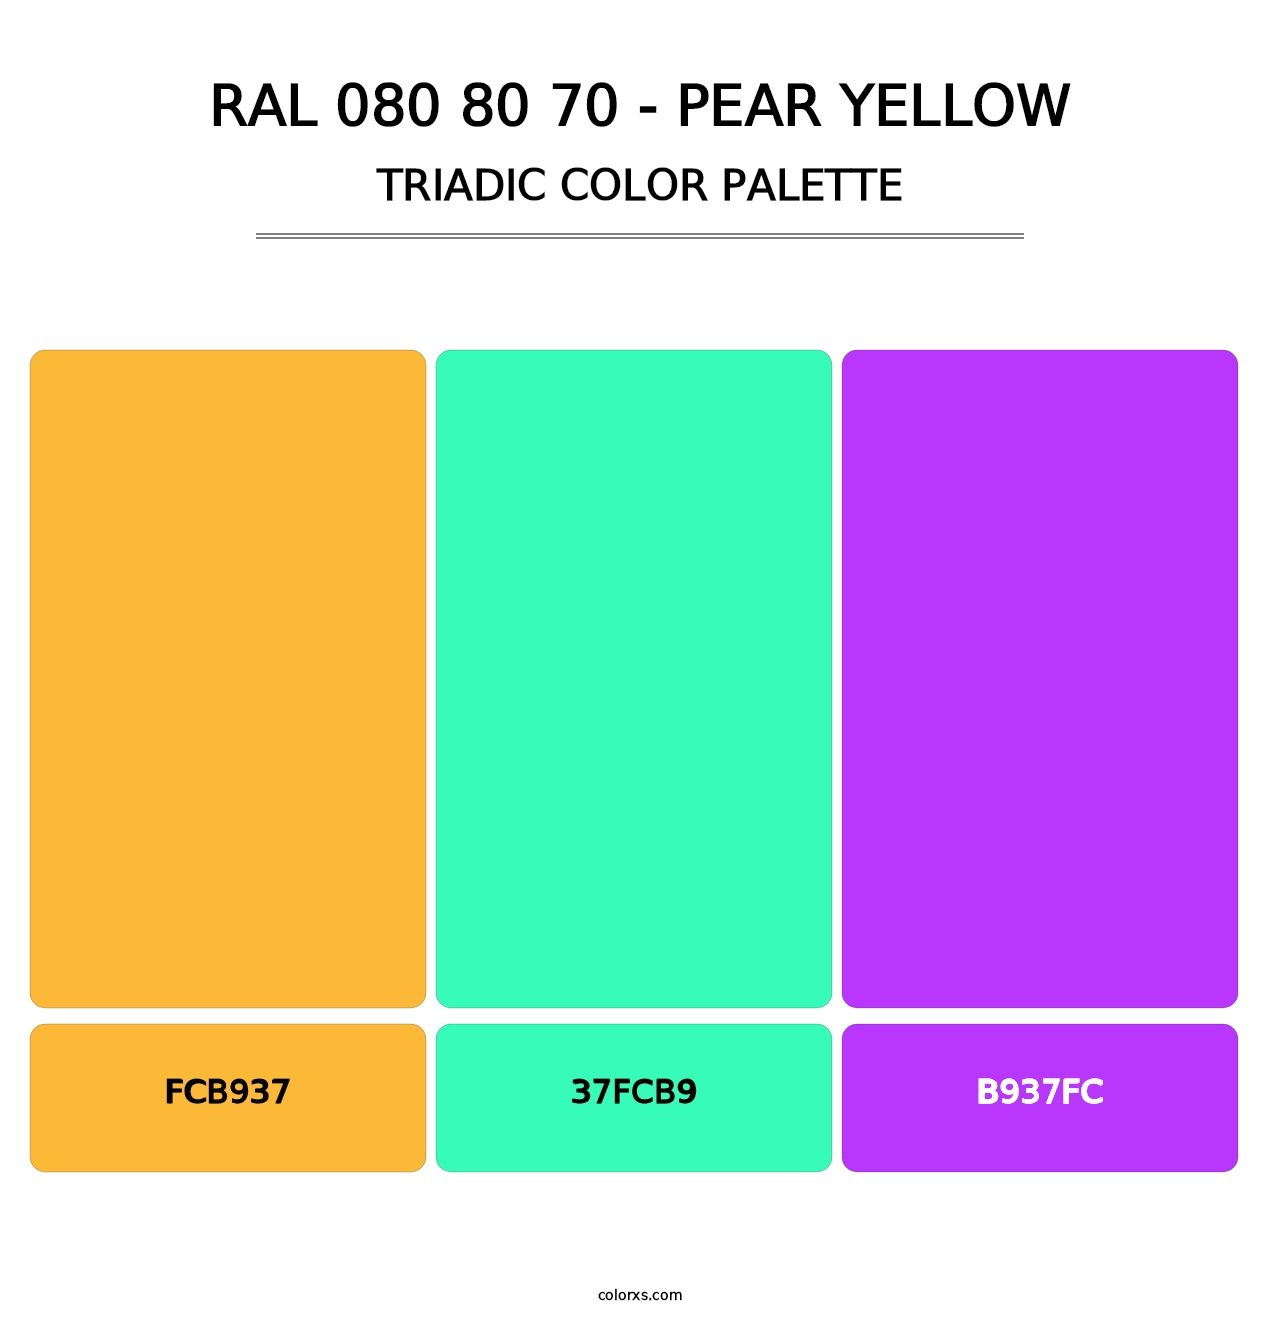 RAL 080 80 70 - Pear Yellow - Triadic Color Palette